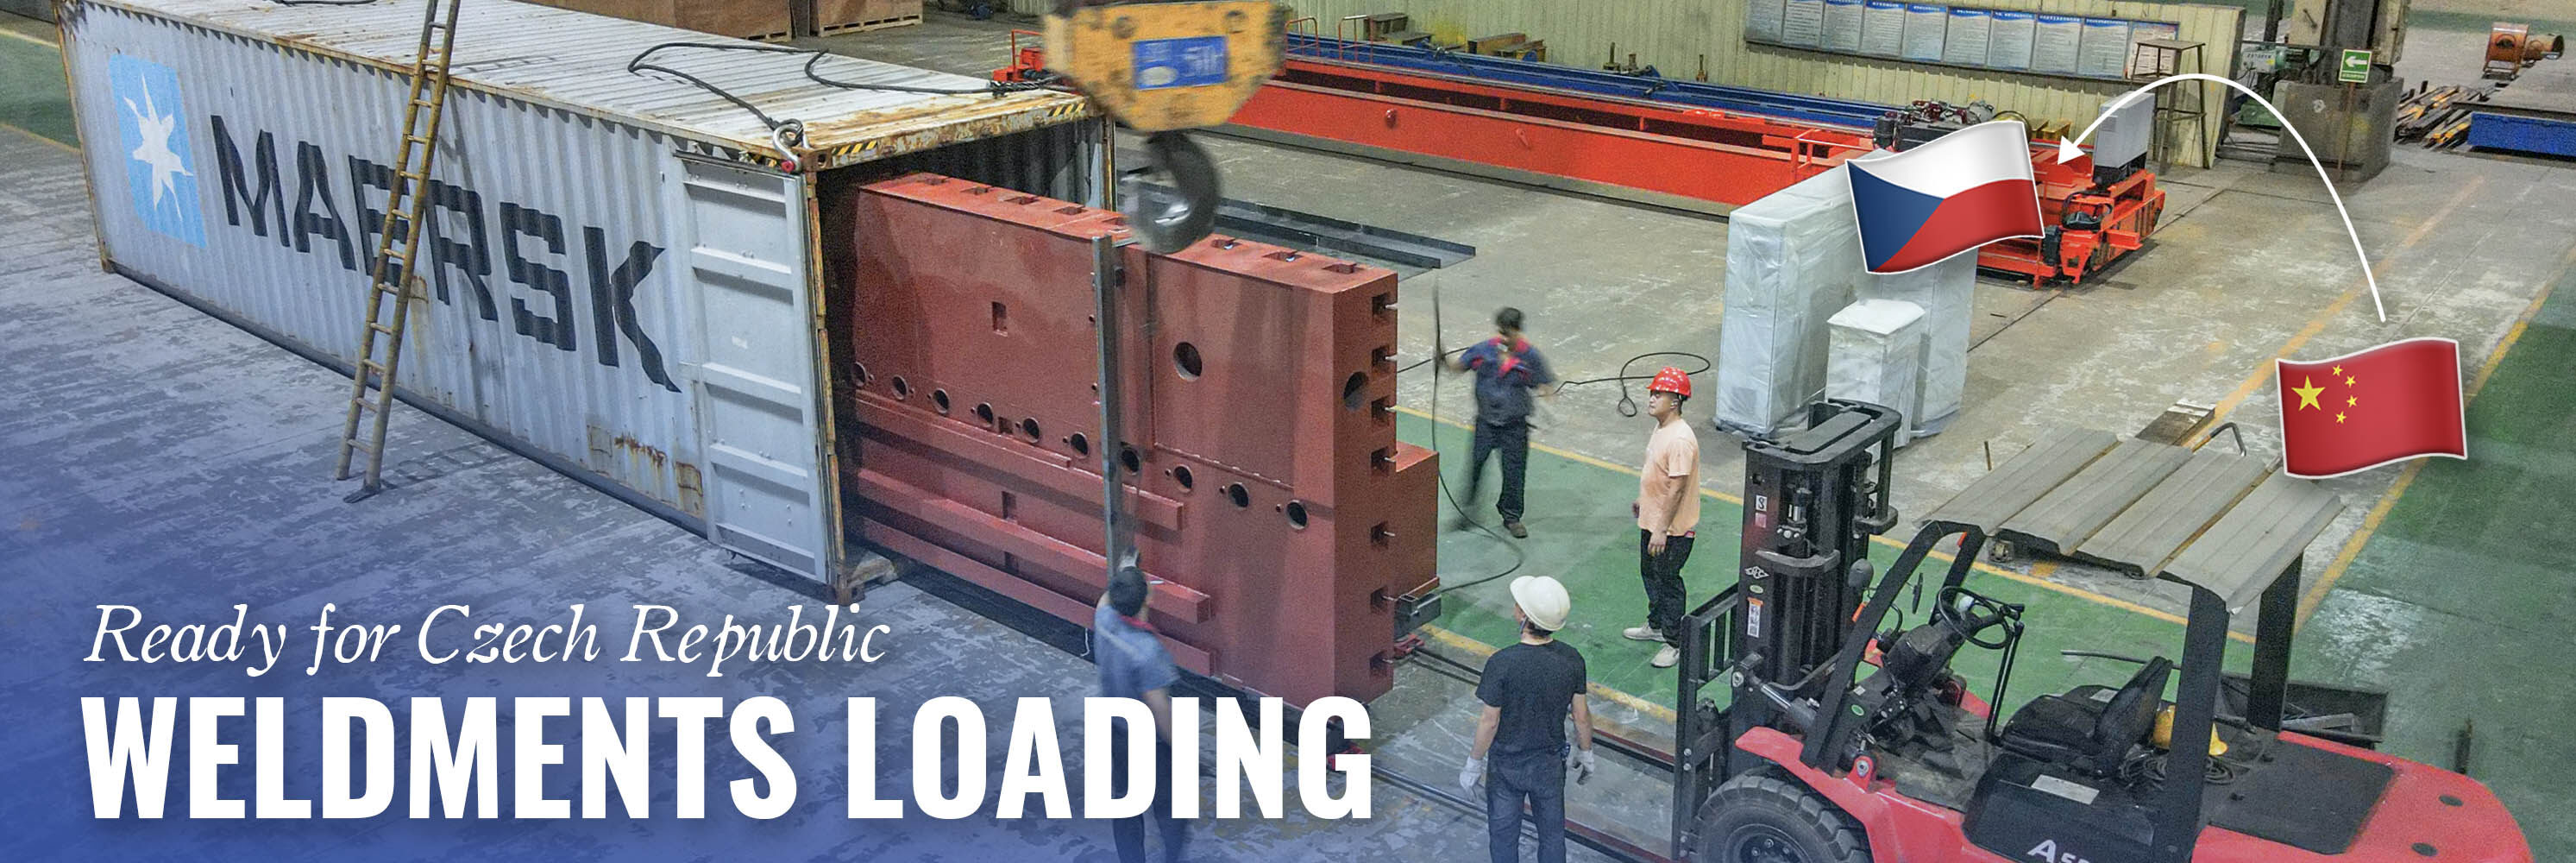 Congratulations on Weldments Loaded Successfully, Ready to Ship to Czech Republic!